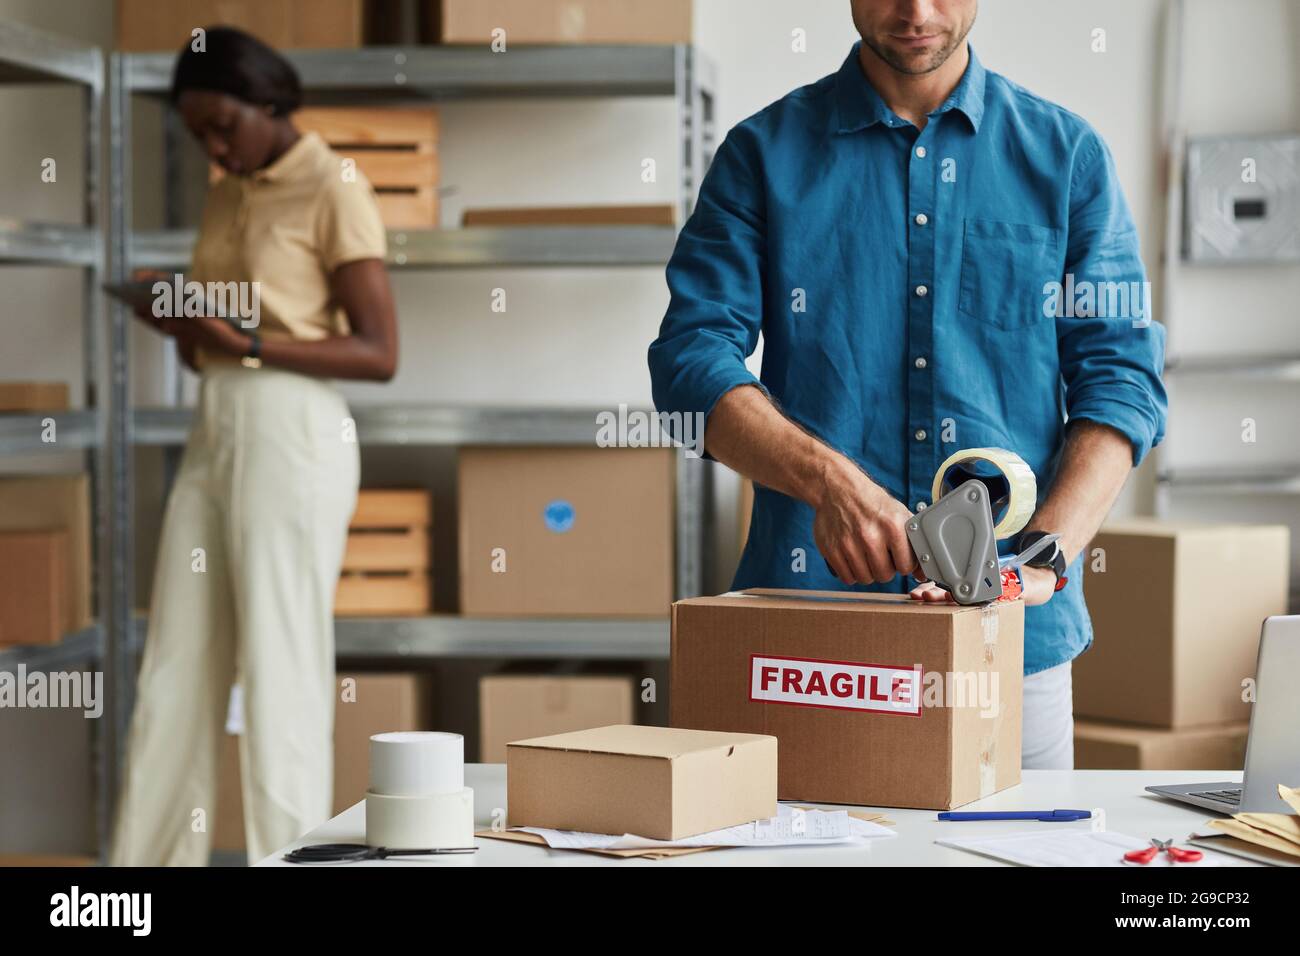 Cropped portrait of young man packing boxes at warehouse with Fragile sticker, copy space Stock Photo